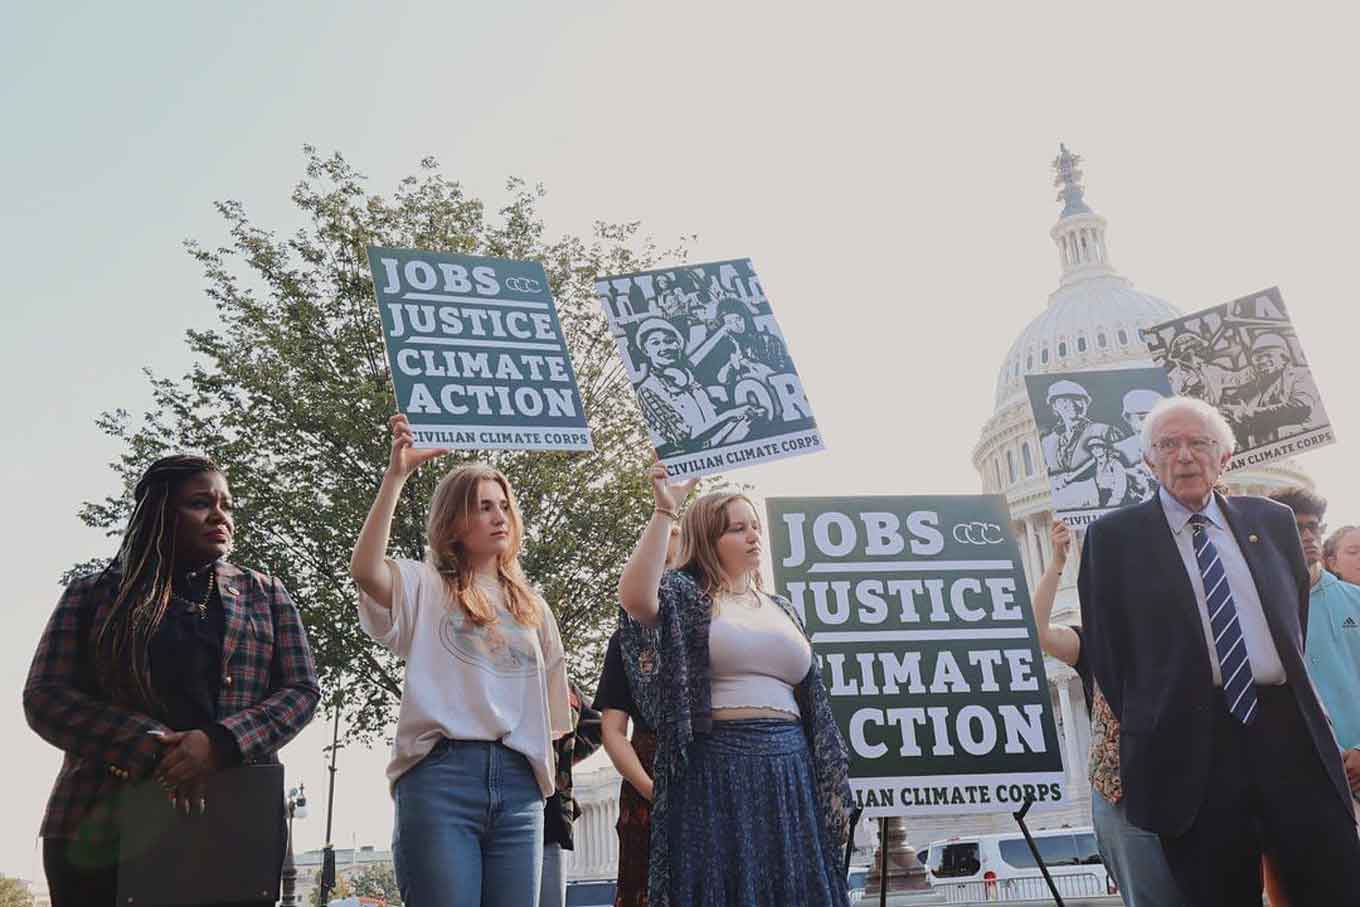 Activists hold signs at a rally that say "jobs, justice, climate action"